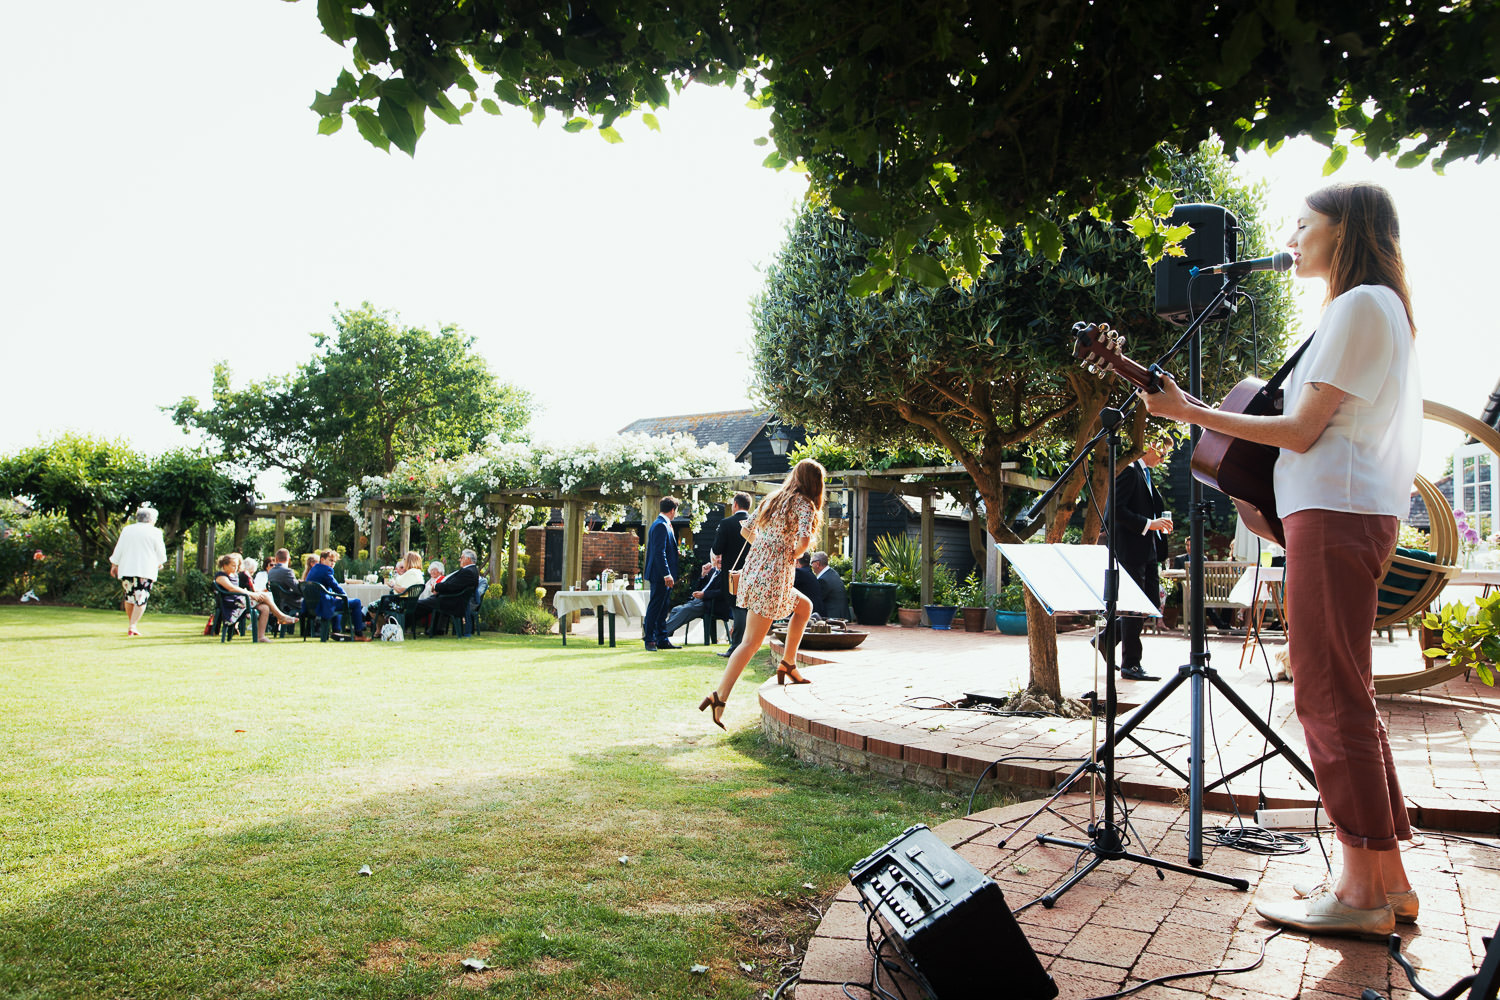 A woman is playing guitar and singing to a garden full of people enjoying drinks after a wedding.